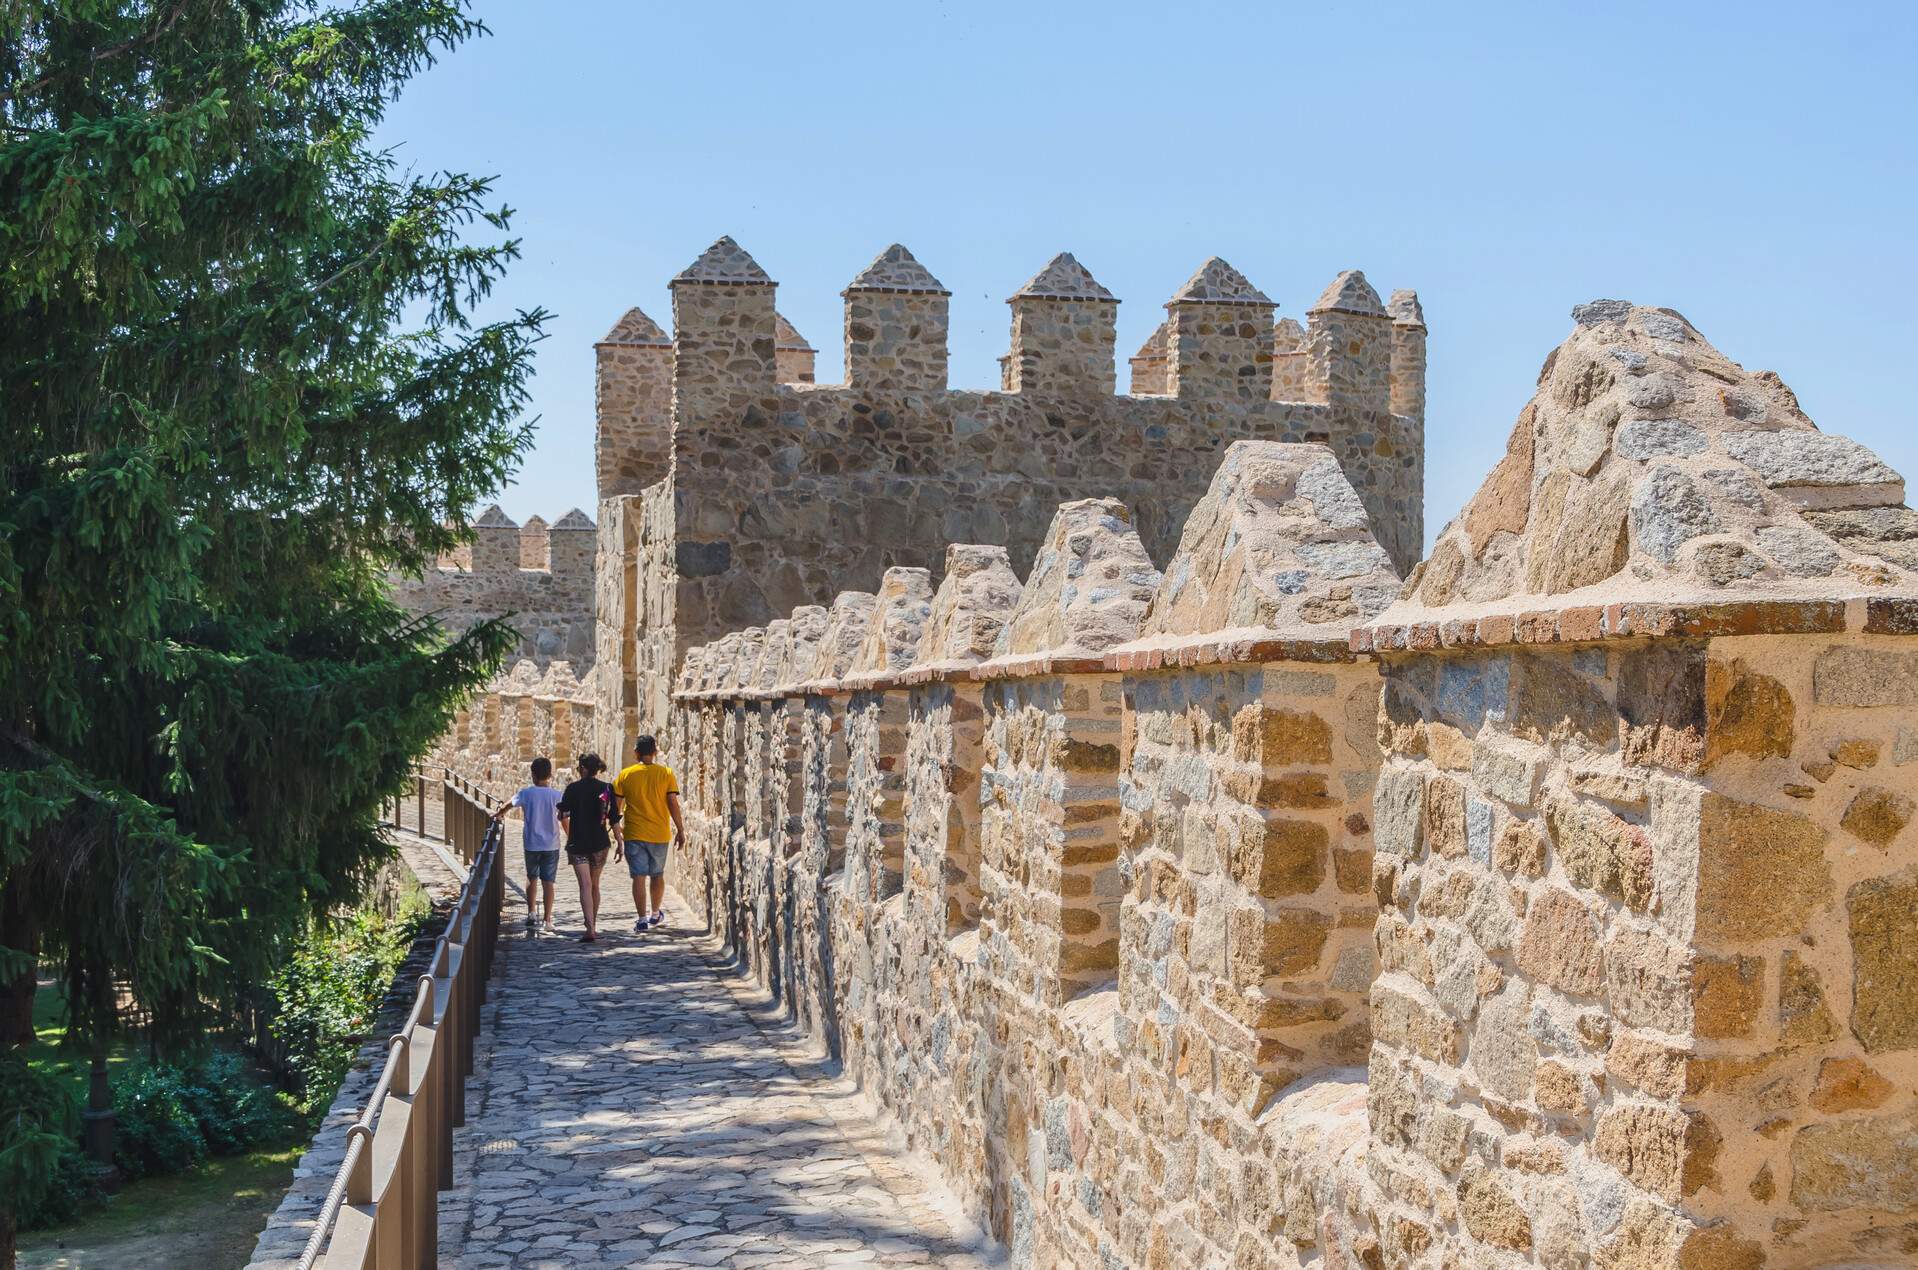 People walk on the footpath by the stone walls of a historical medieval fortification.